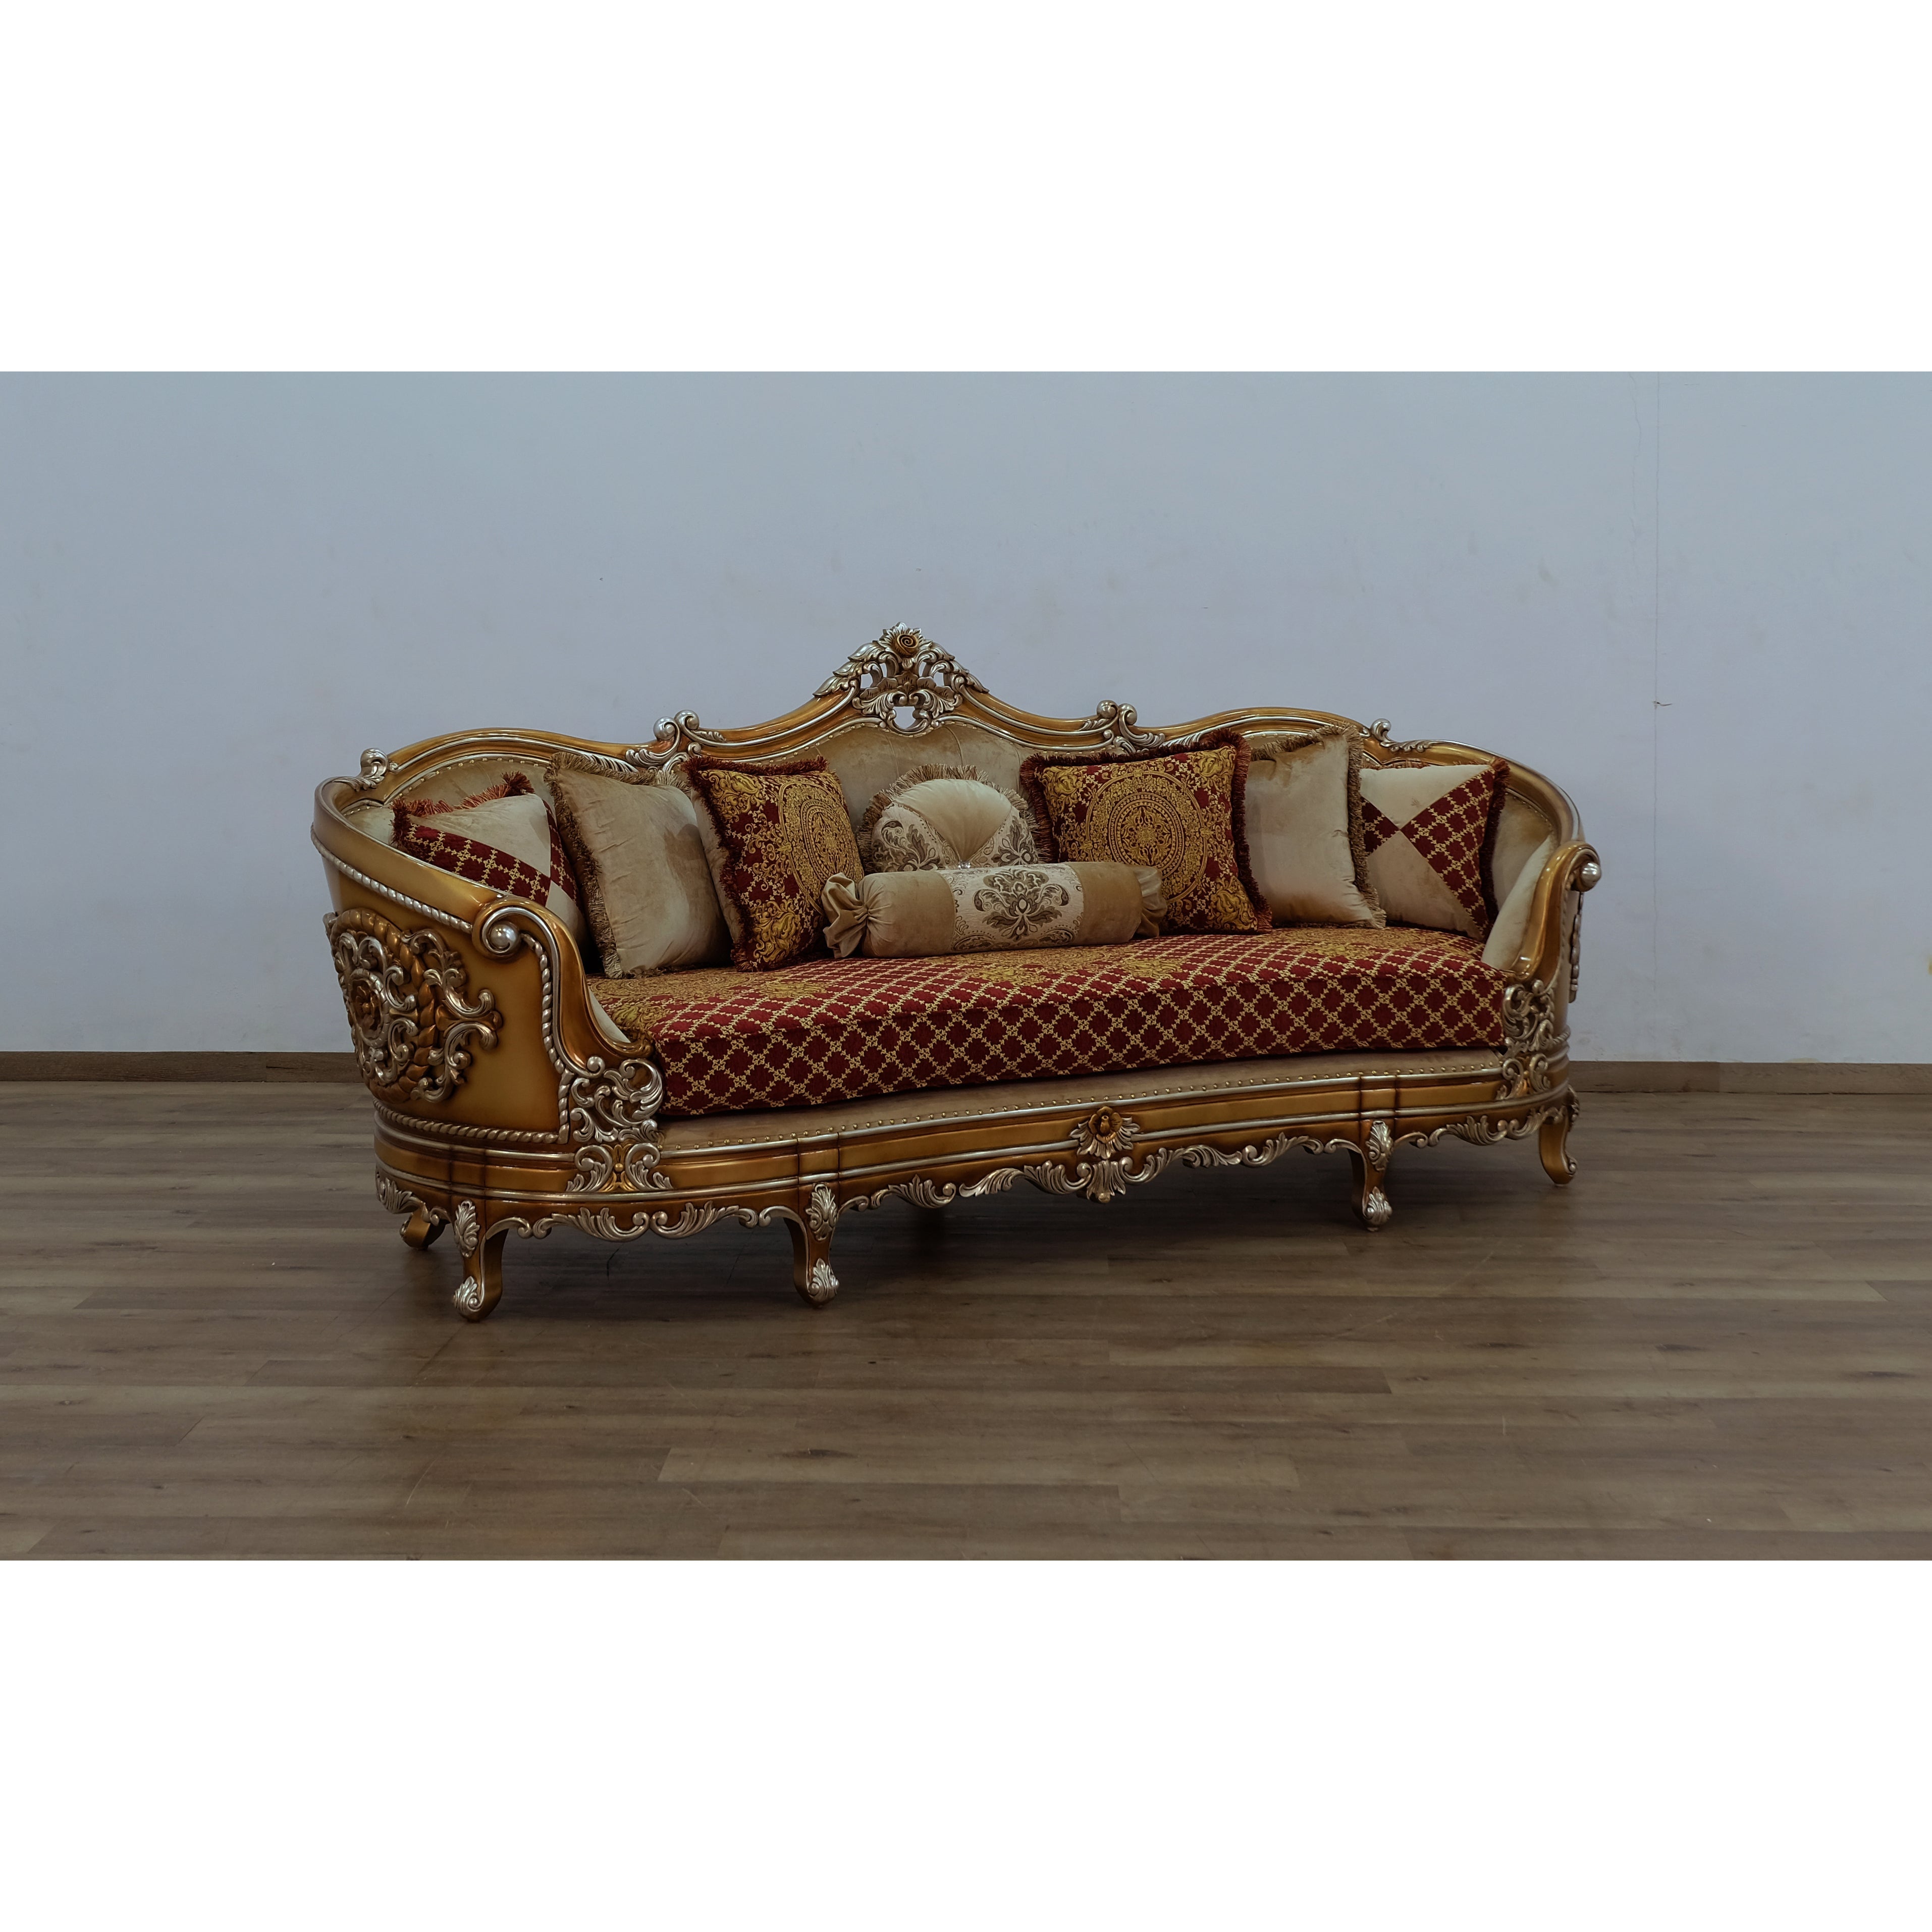 European Furniture - Saint Germain 4 Piece Luxury Living Room Set in Red Gold & Antique Silver - 35554-SL2C - New Star Living